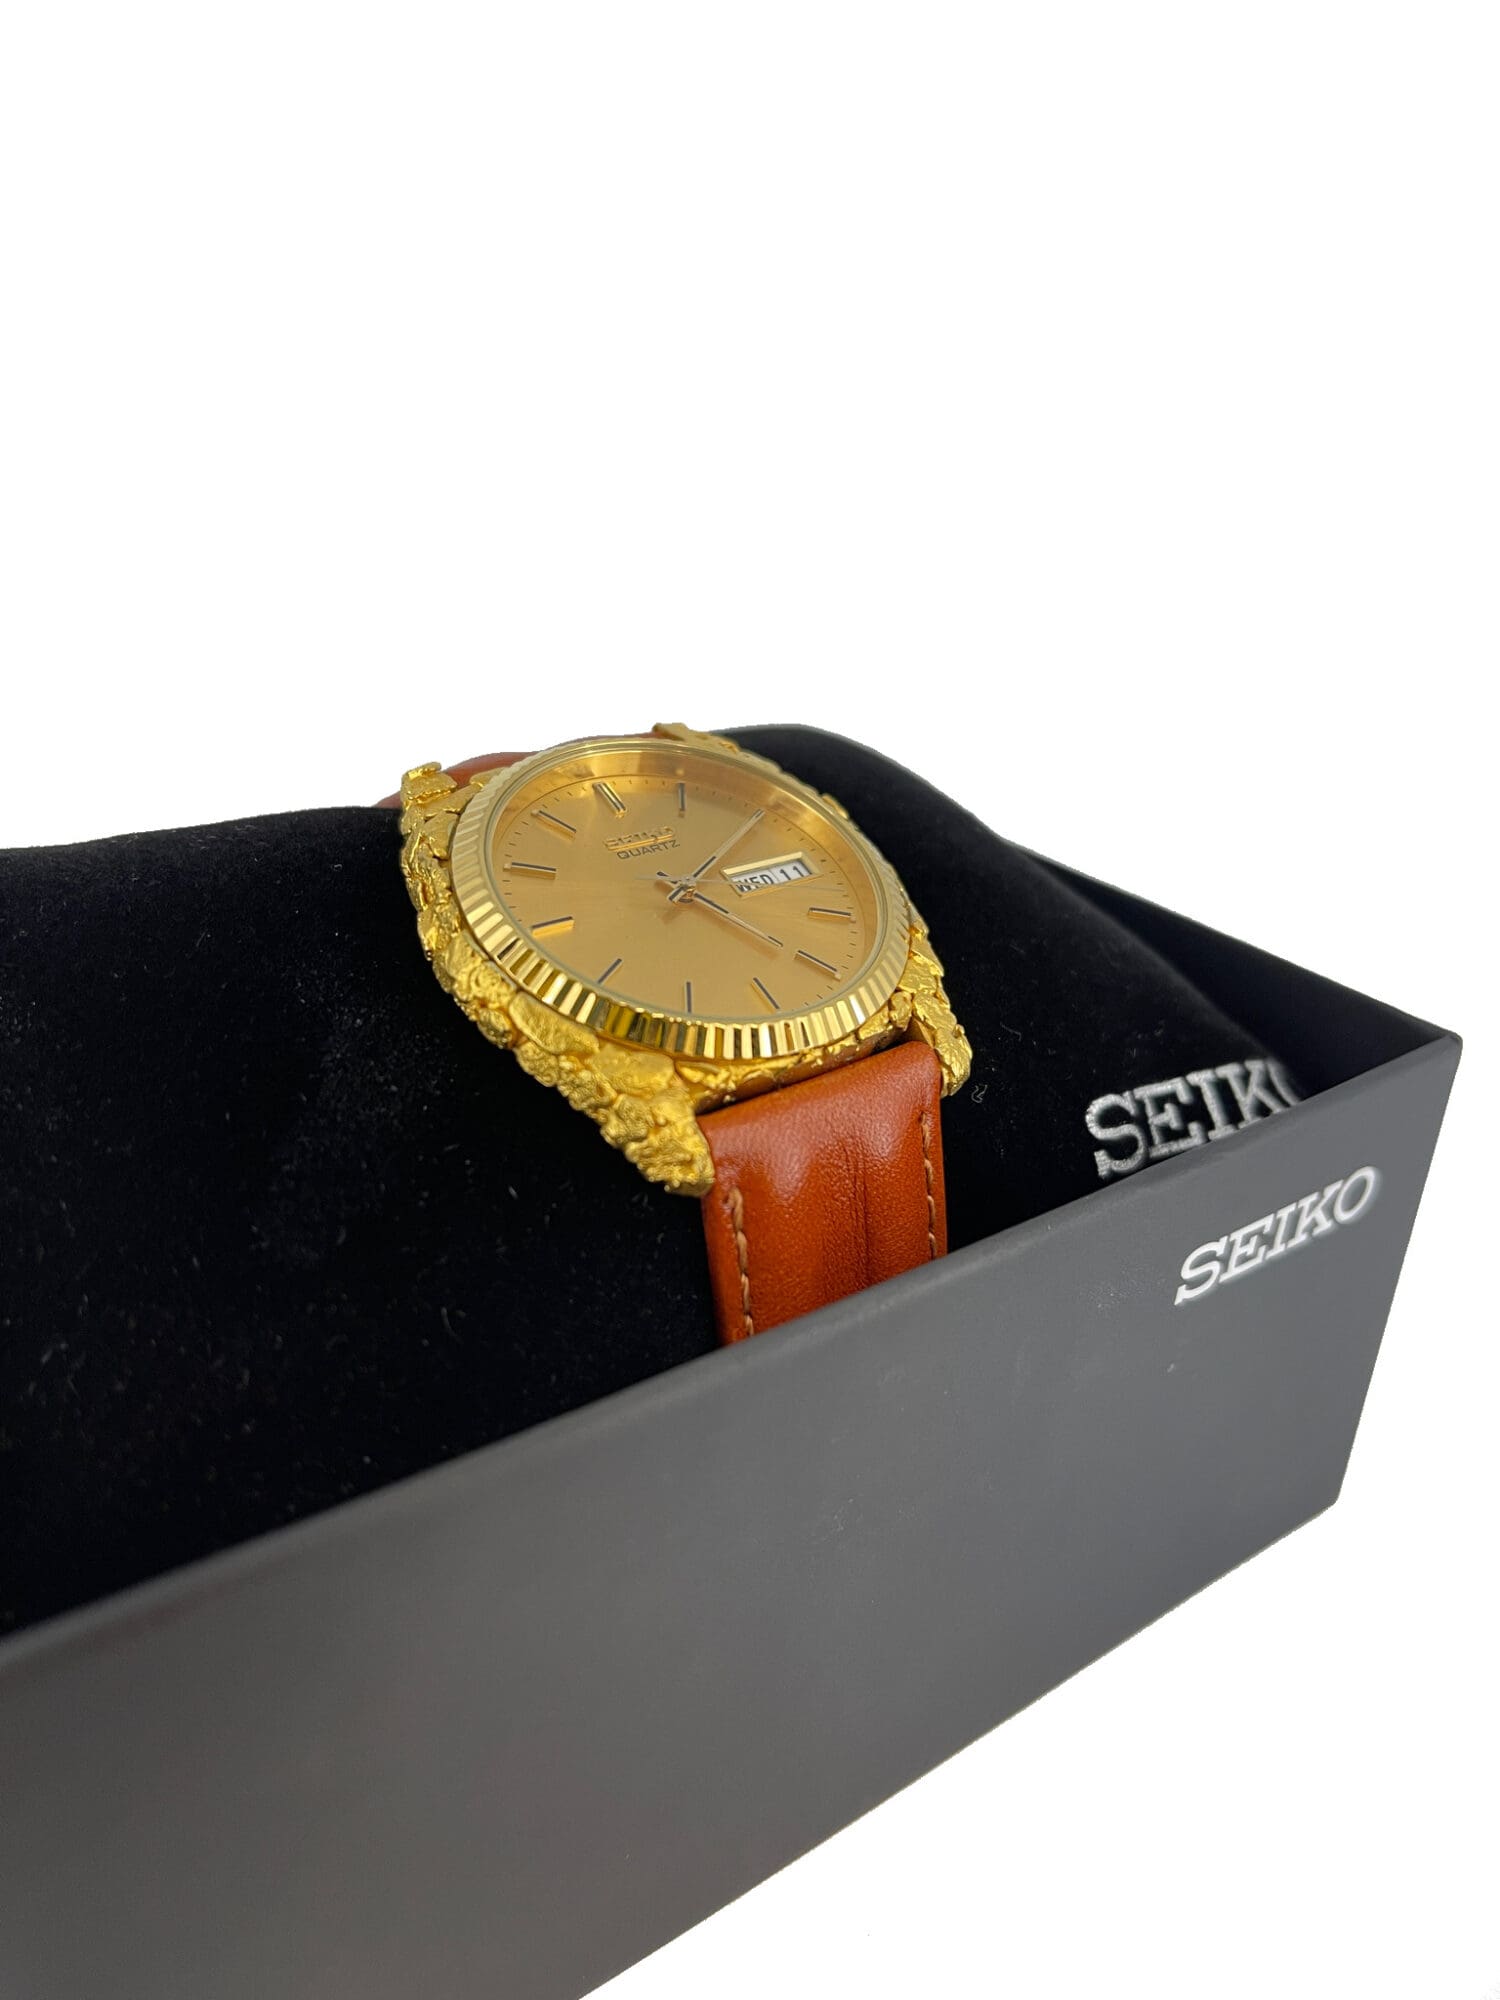 Seiko Alaskan Gold Nugget Watch Face with Leather Band - Alaska Mint